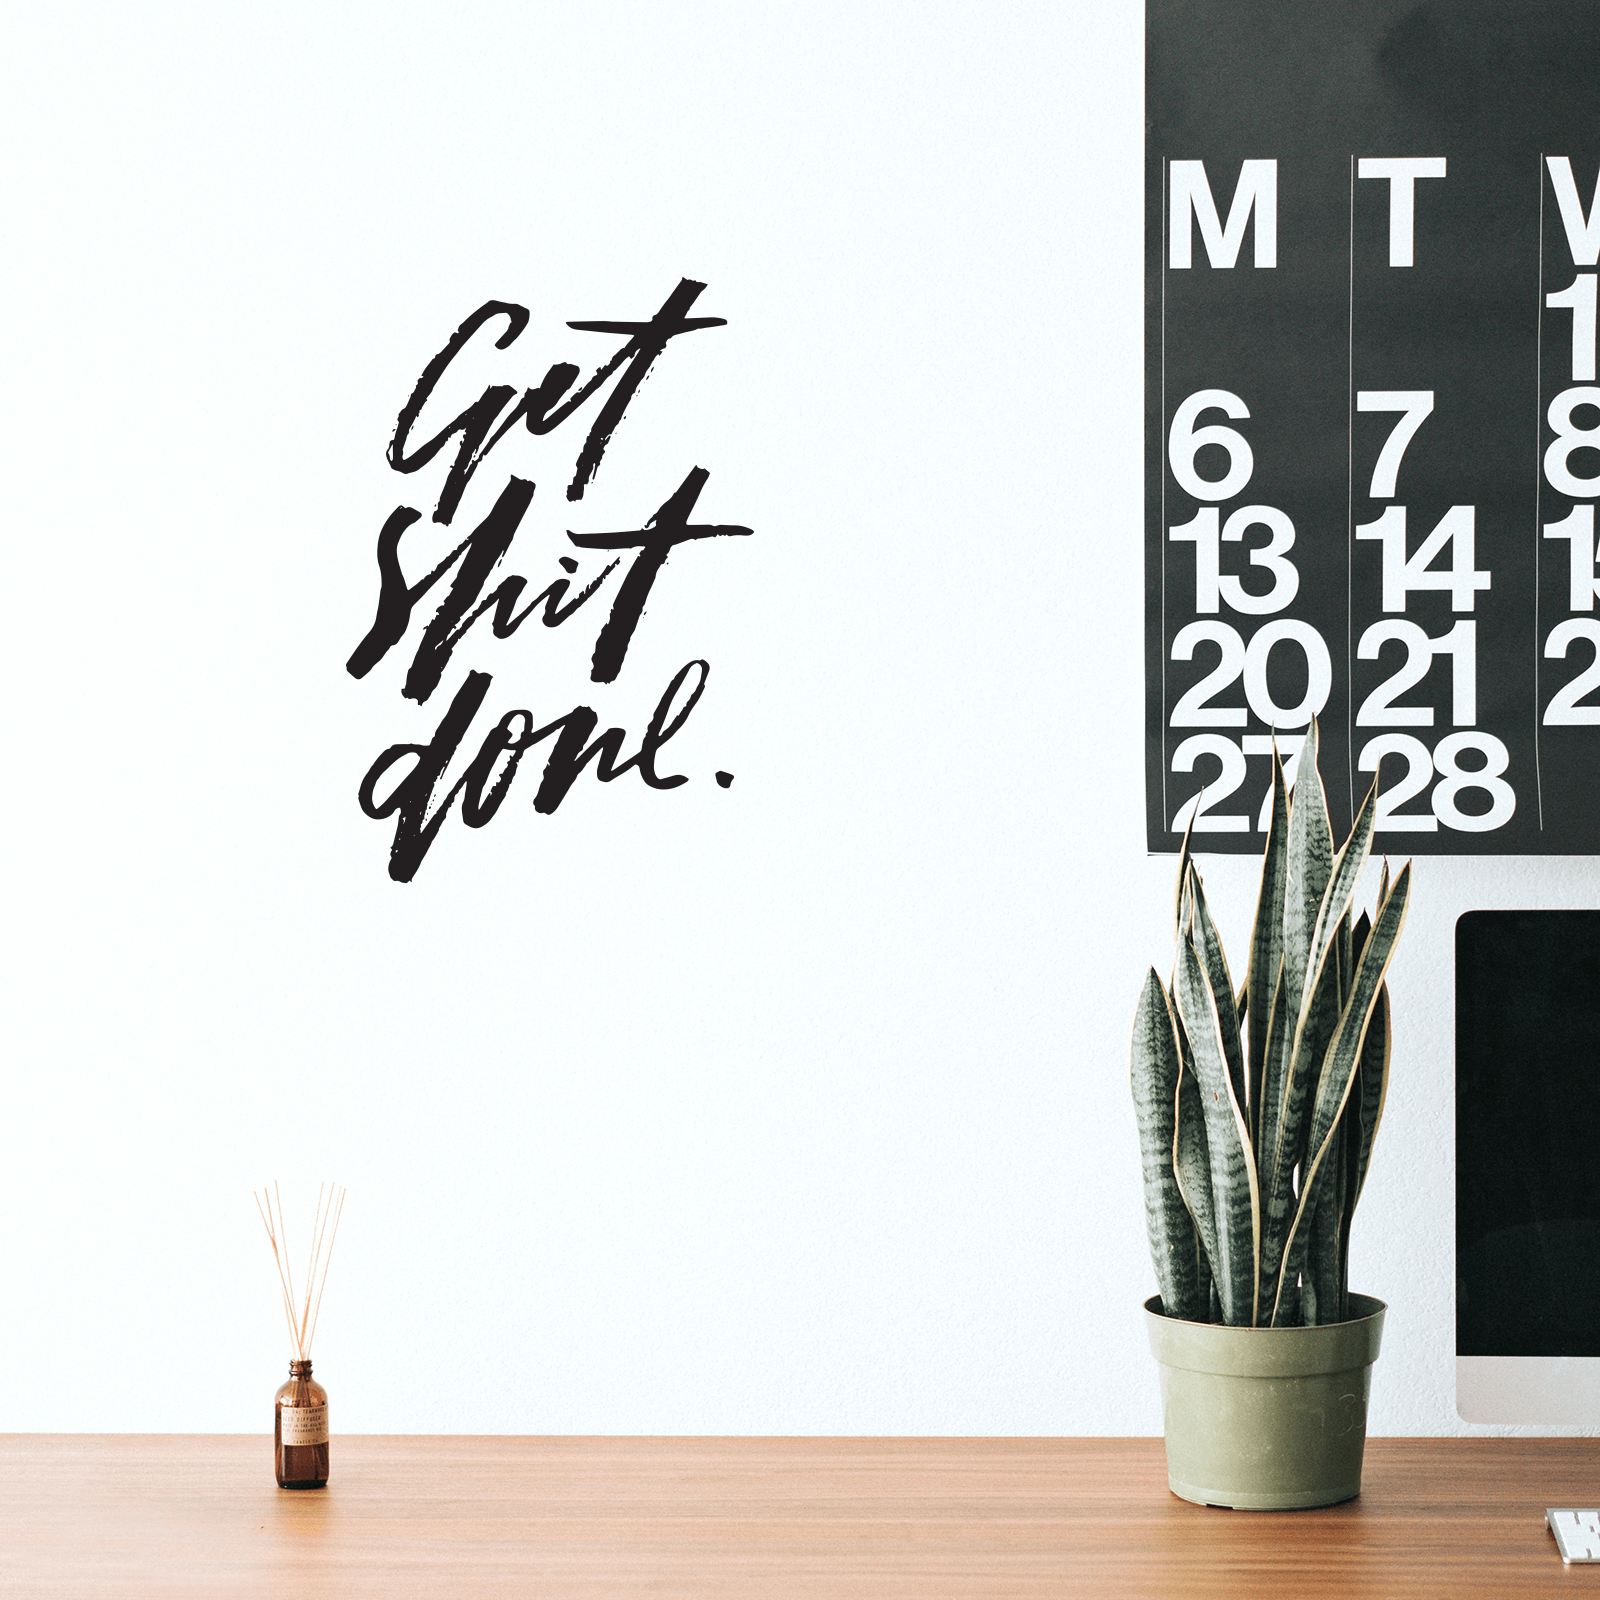 Get Shit Done Wall Decal